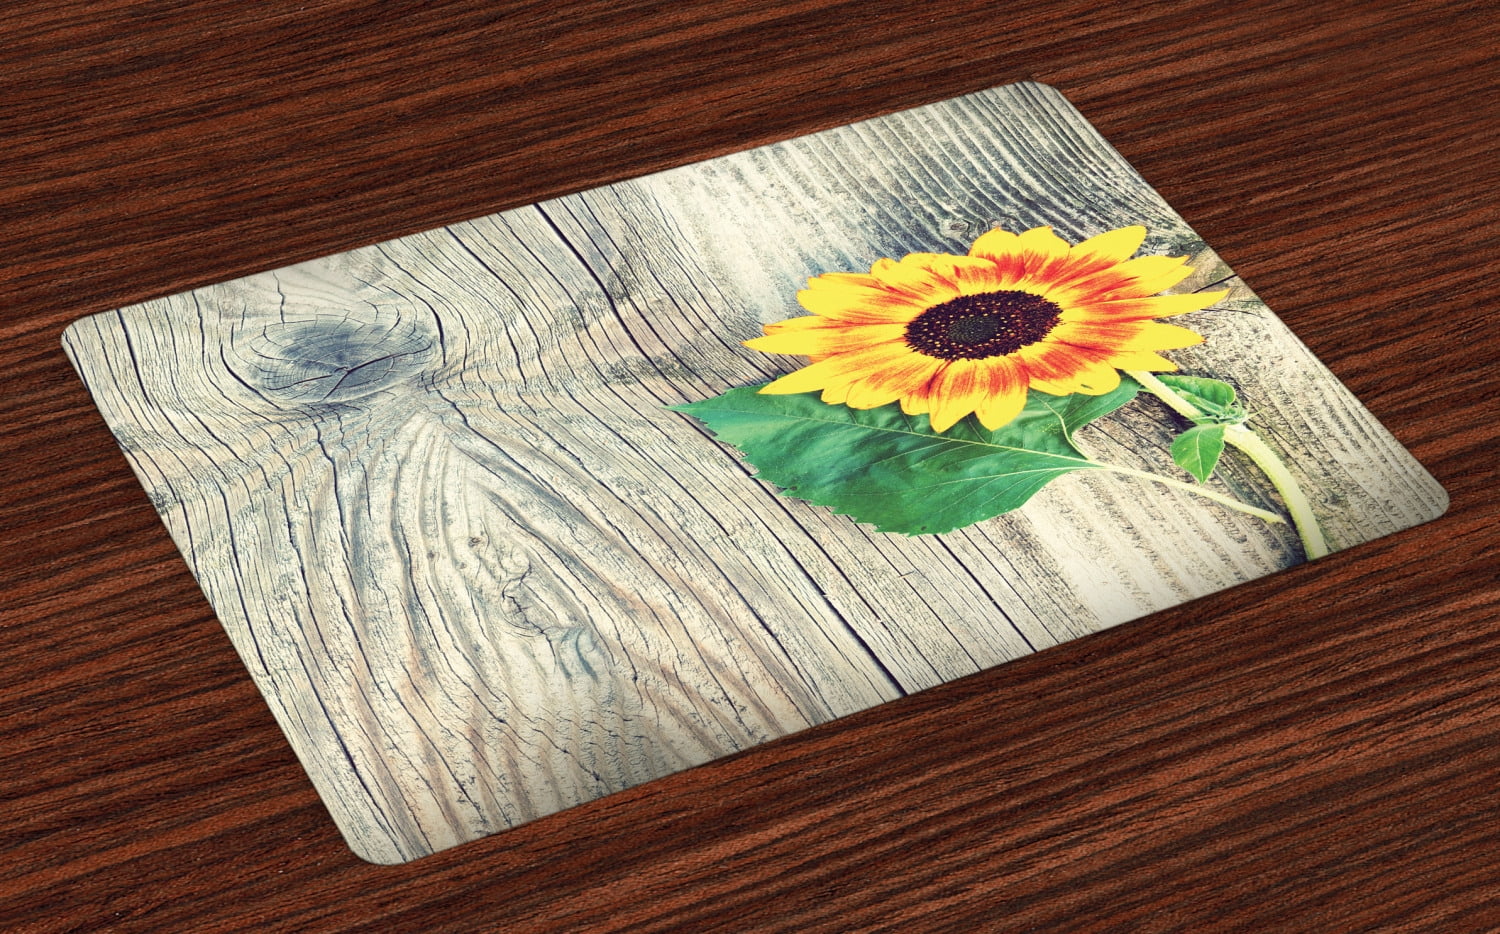 Oarencol Retro Sunflower Art Grunge Vintage Florals Placemat Table Mats Heat-Resistant Washable Clean Kitchen Place Mats for Dining Table Decoration 18 X 12